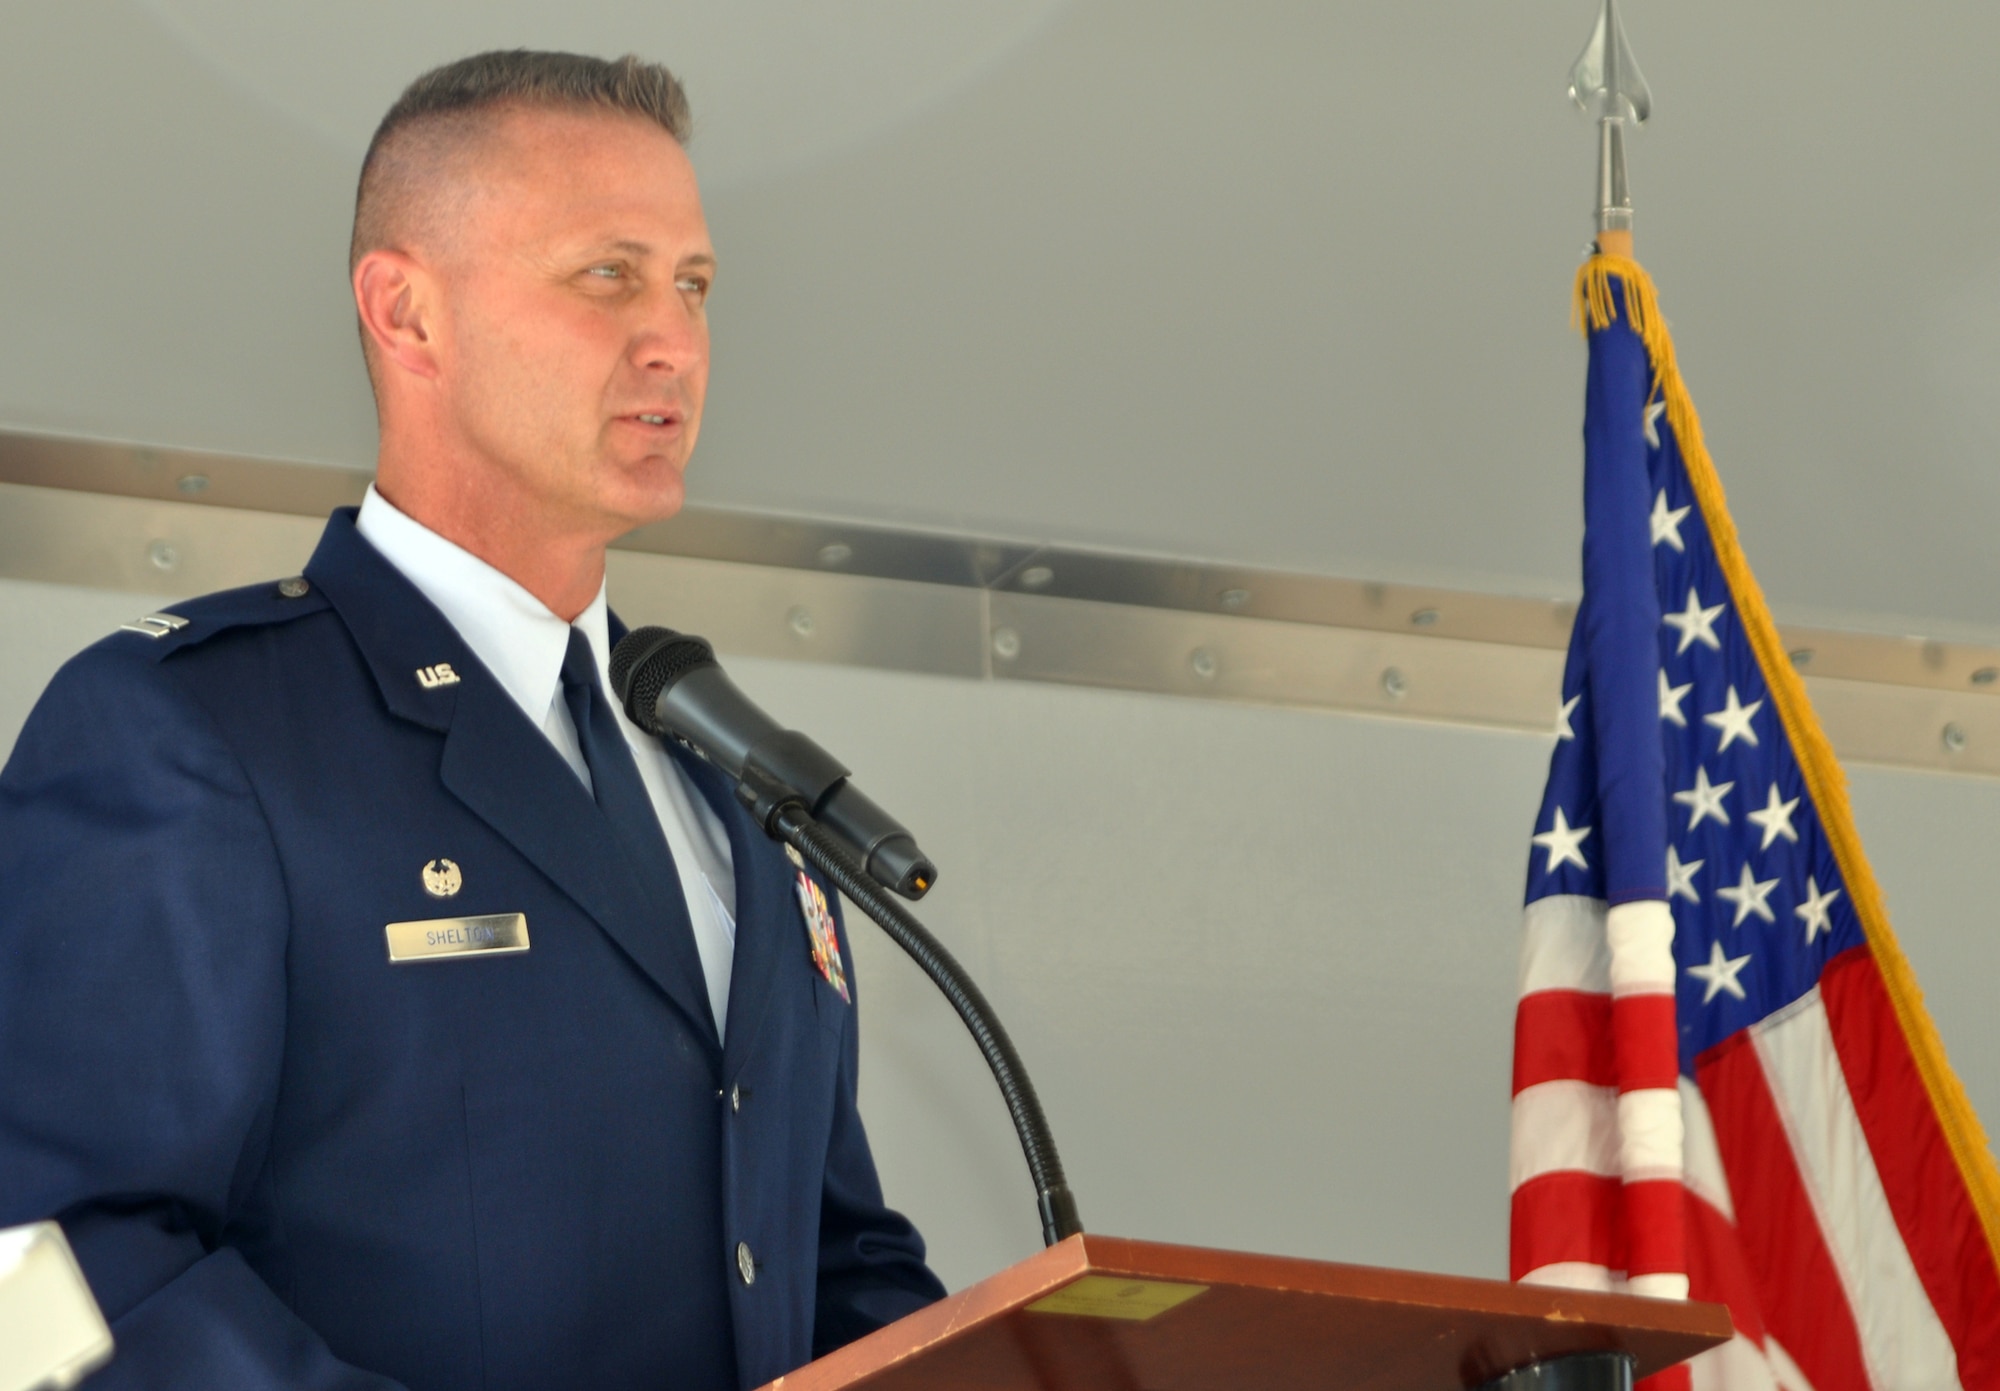 Capt. Collin "Bo" Shelton, 302nd Aircraft Maintenance Squadron commander, addresses the crowd after assuming command of the unit July 11 during a cereromy at Peterson Air Force Base, Colo. (U.S. Air Force photo/Tech. Sgt. Daniel Butterfield)